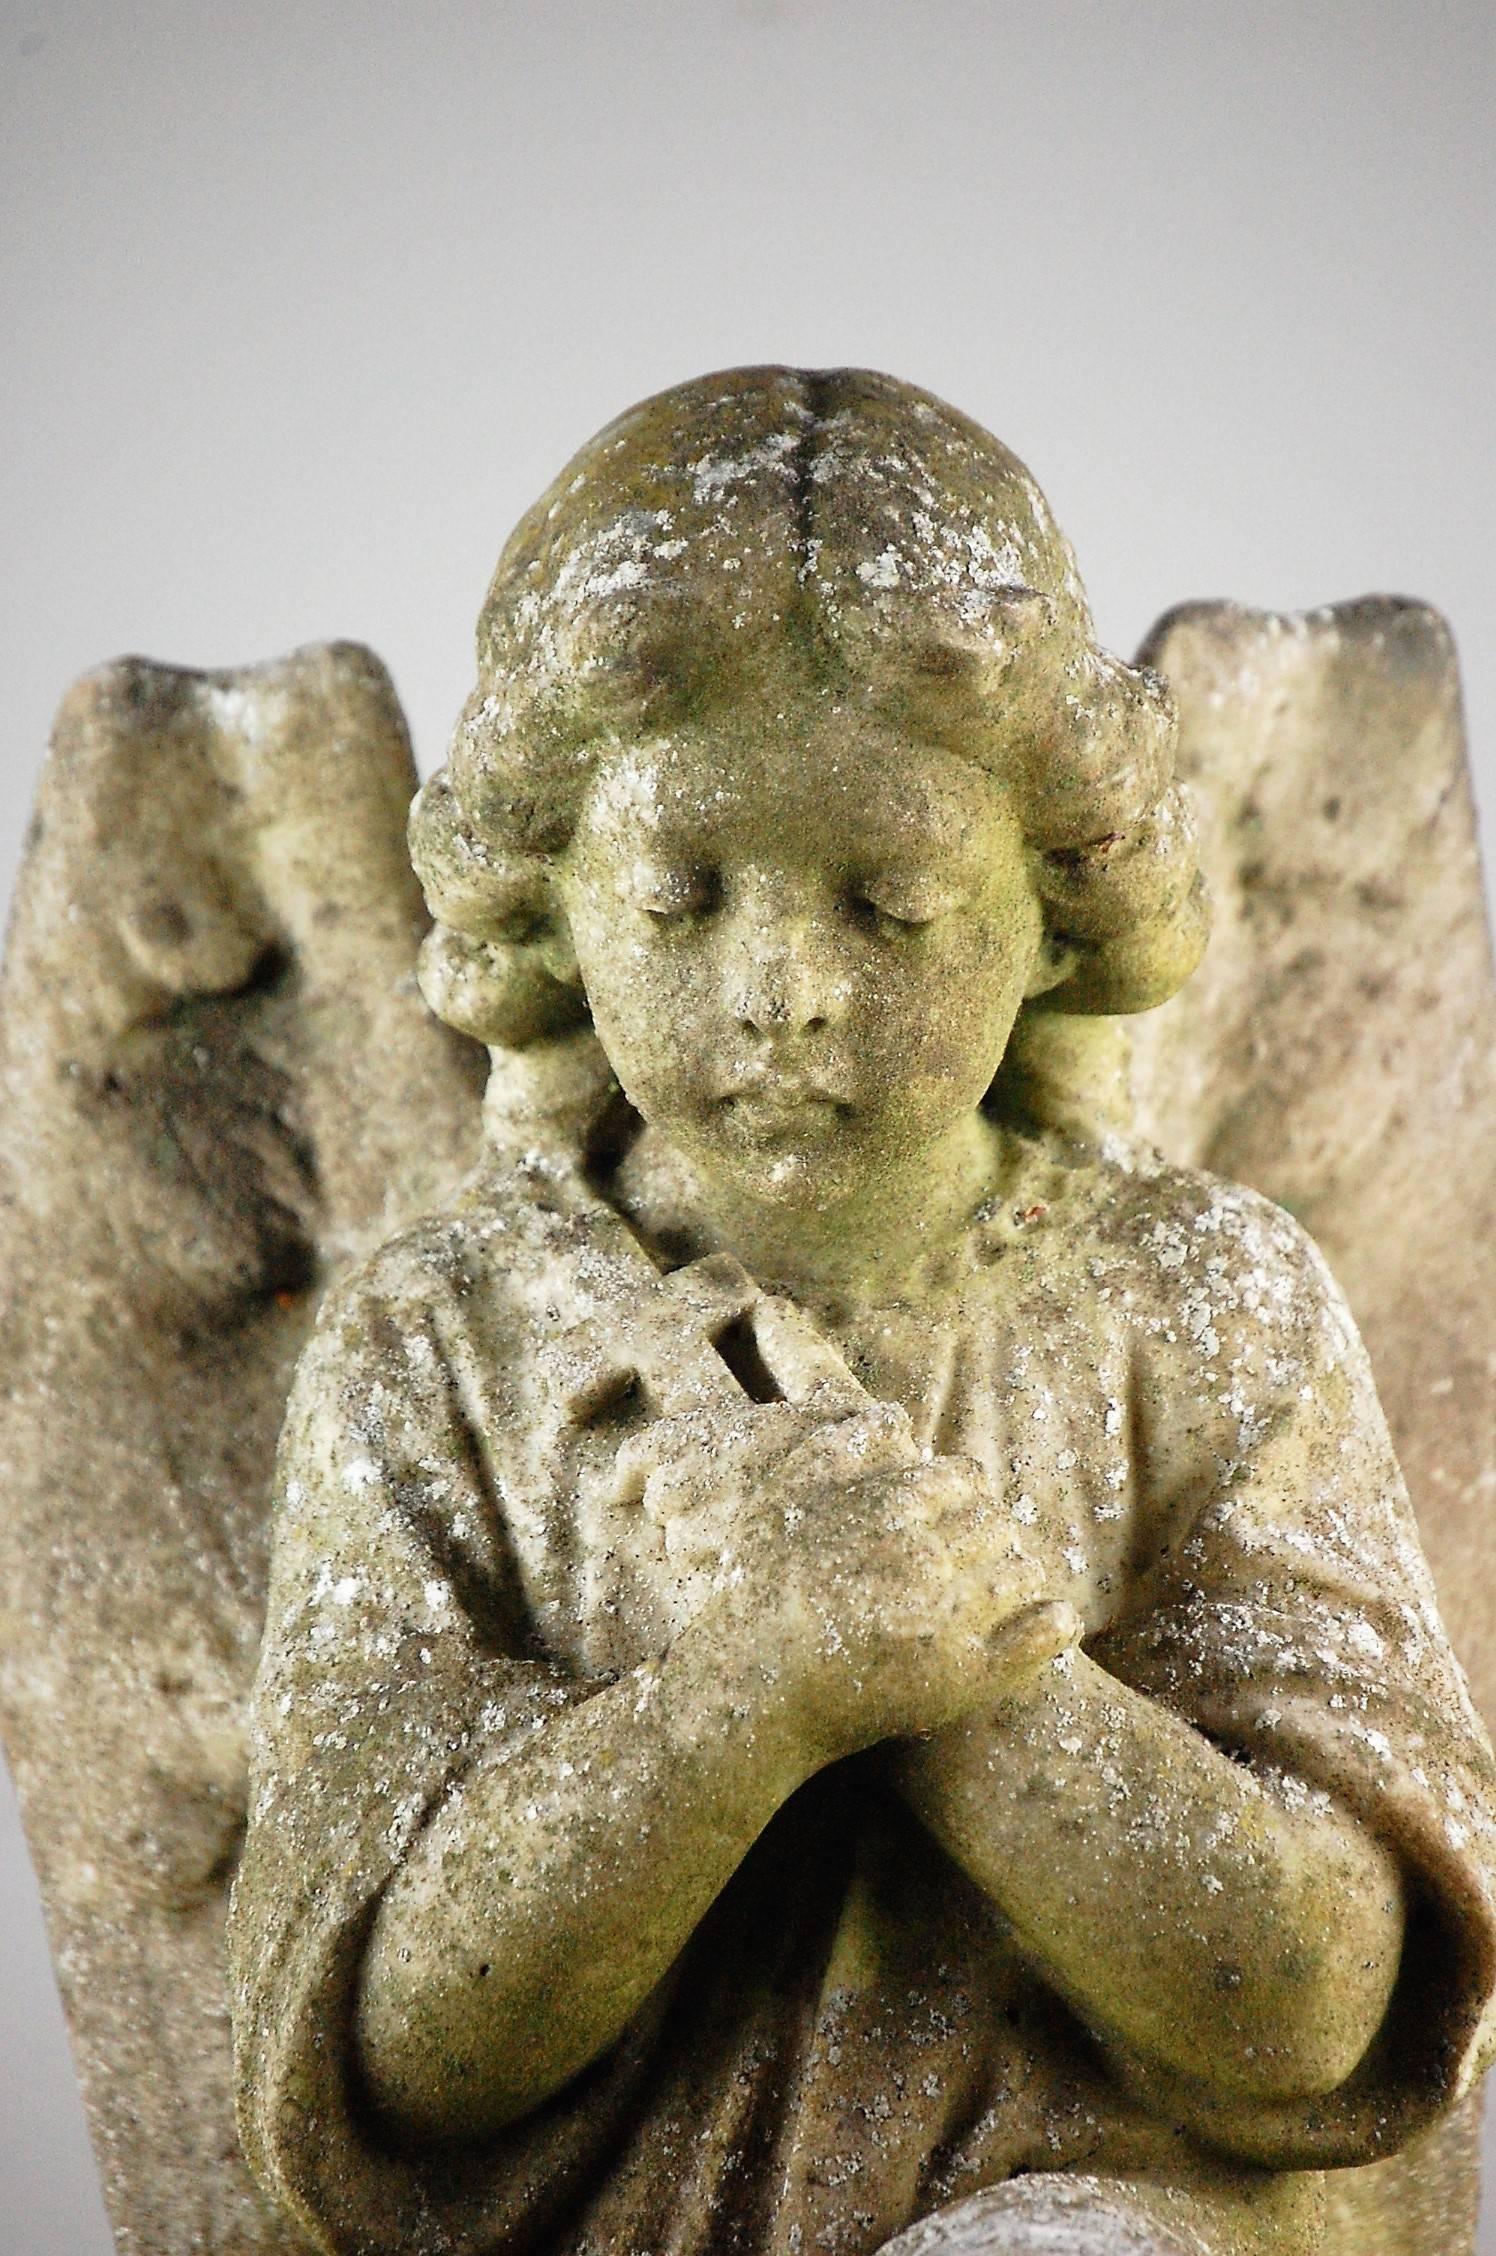 Weathered marble angel kneeling on a tasselled cushion in prayer clutching a cross. Wonderful detail in carving. Late 19th century, French.